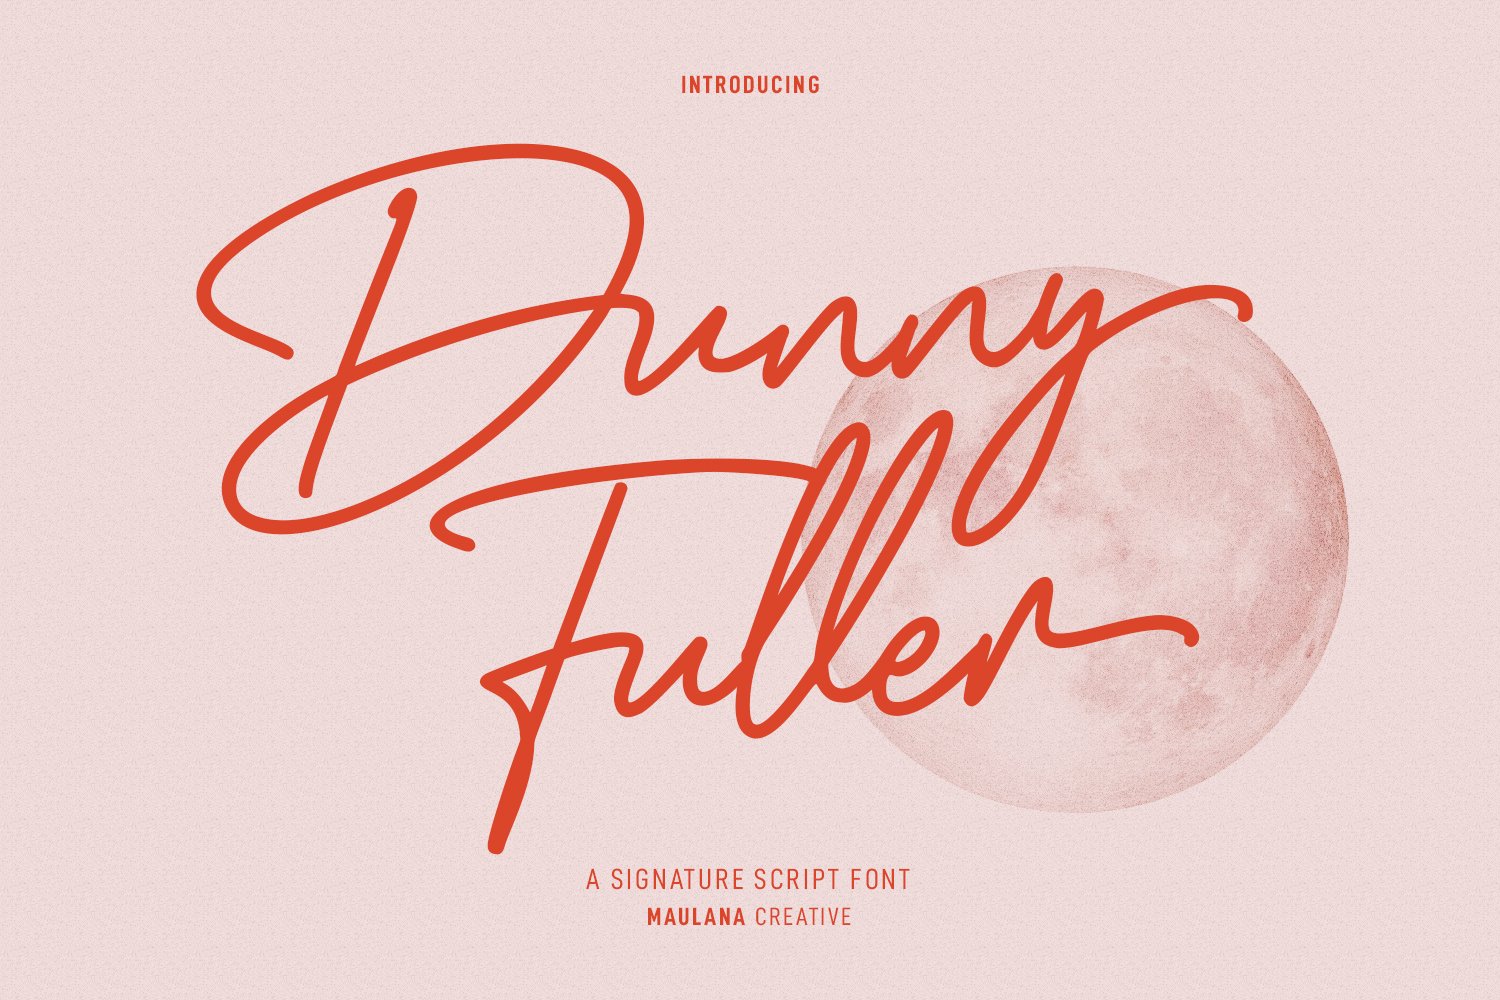 Dunny Fuller Signature Font cover image.